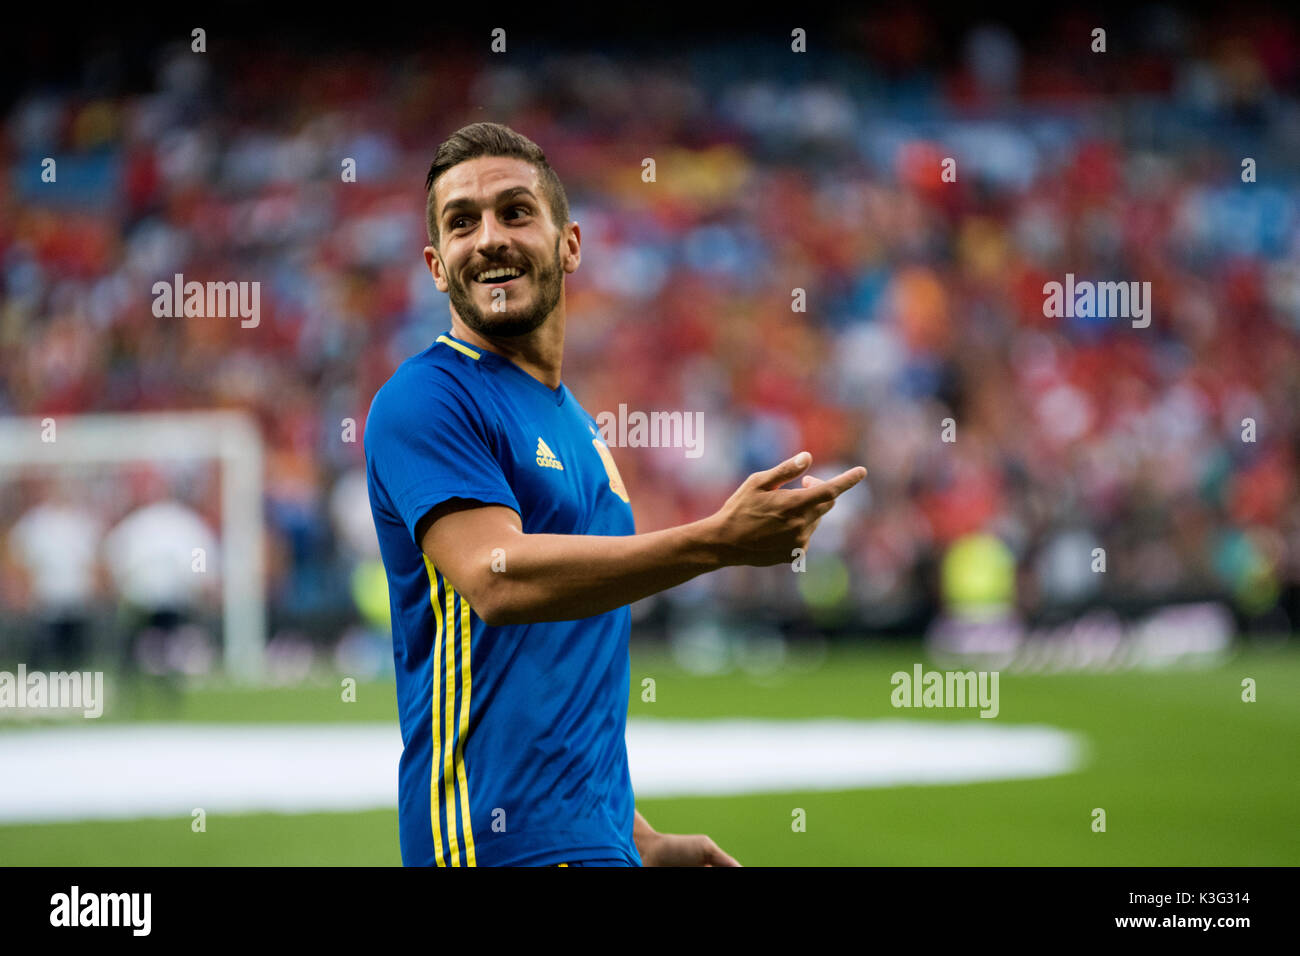 Madrid, Spain. 2nd September, 2017. Pedro Rodriguez (Forward, Spain) during the football match of FIFA World Cup 2018 Qualifying Round between Spain and Italy at Santiago Bernanbeu Stadium on September 2, 2017 in Madrid, Spain. ©David Gato/Alamy Live News Stock Photo